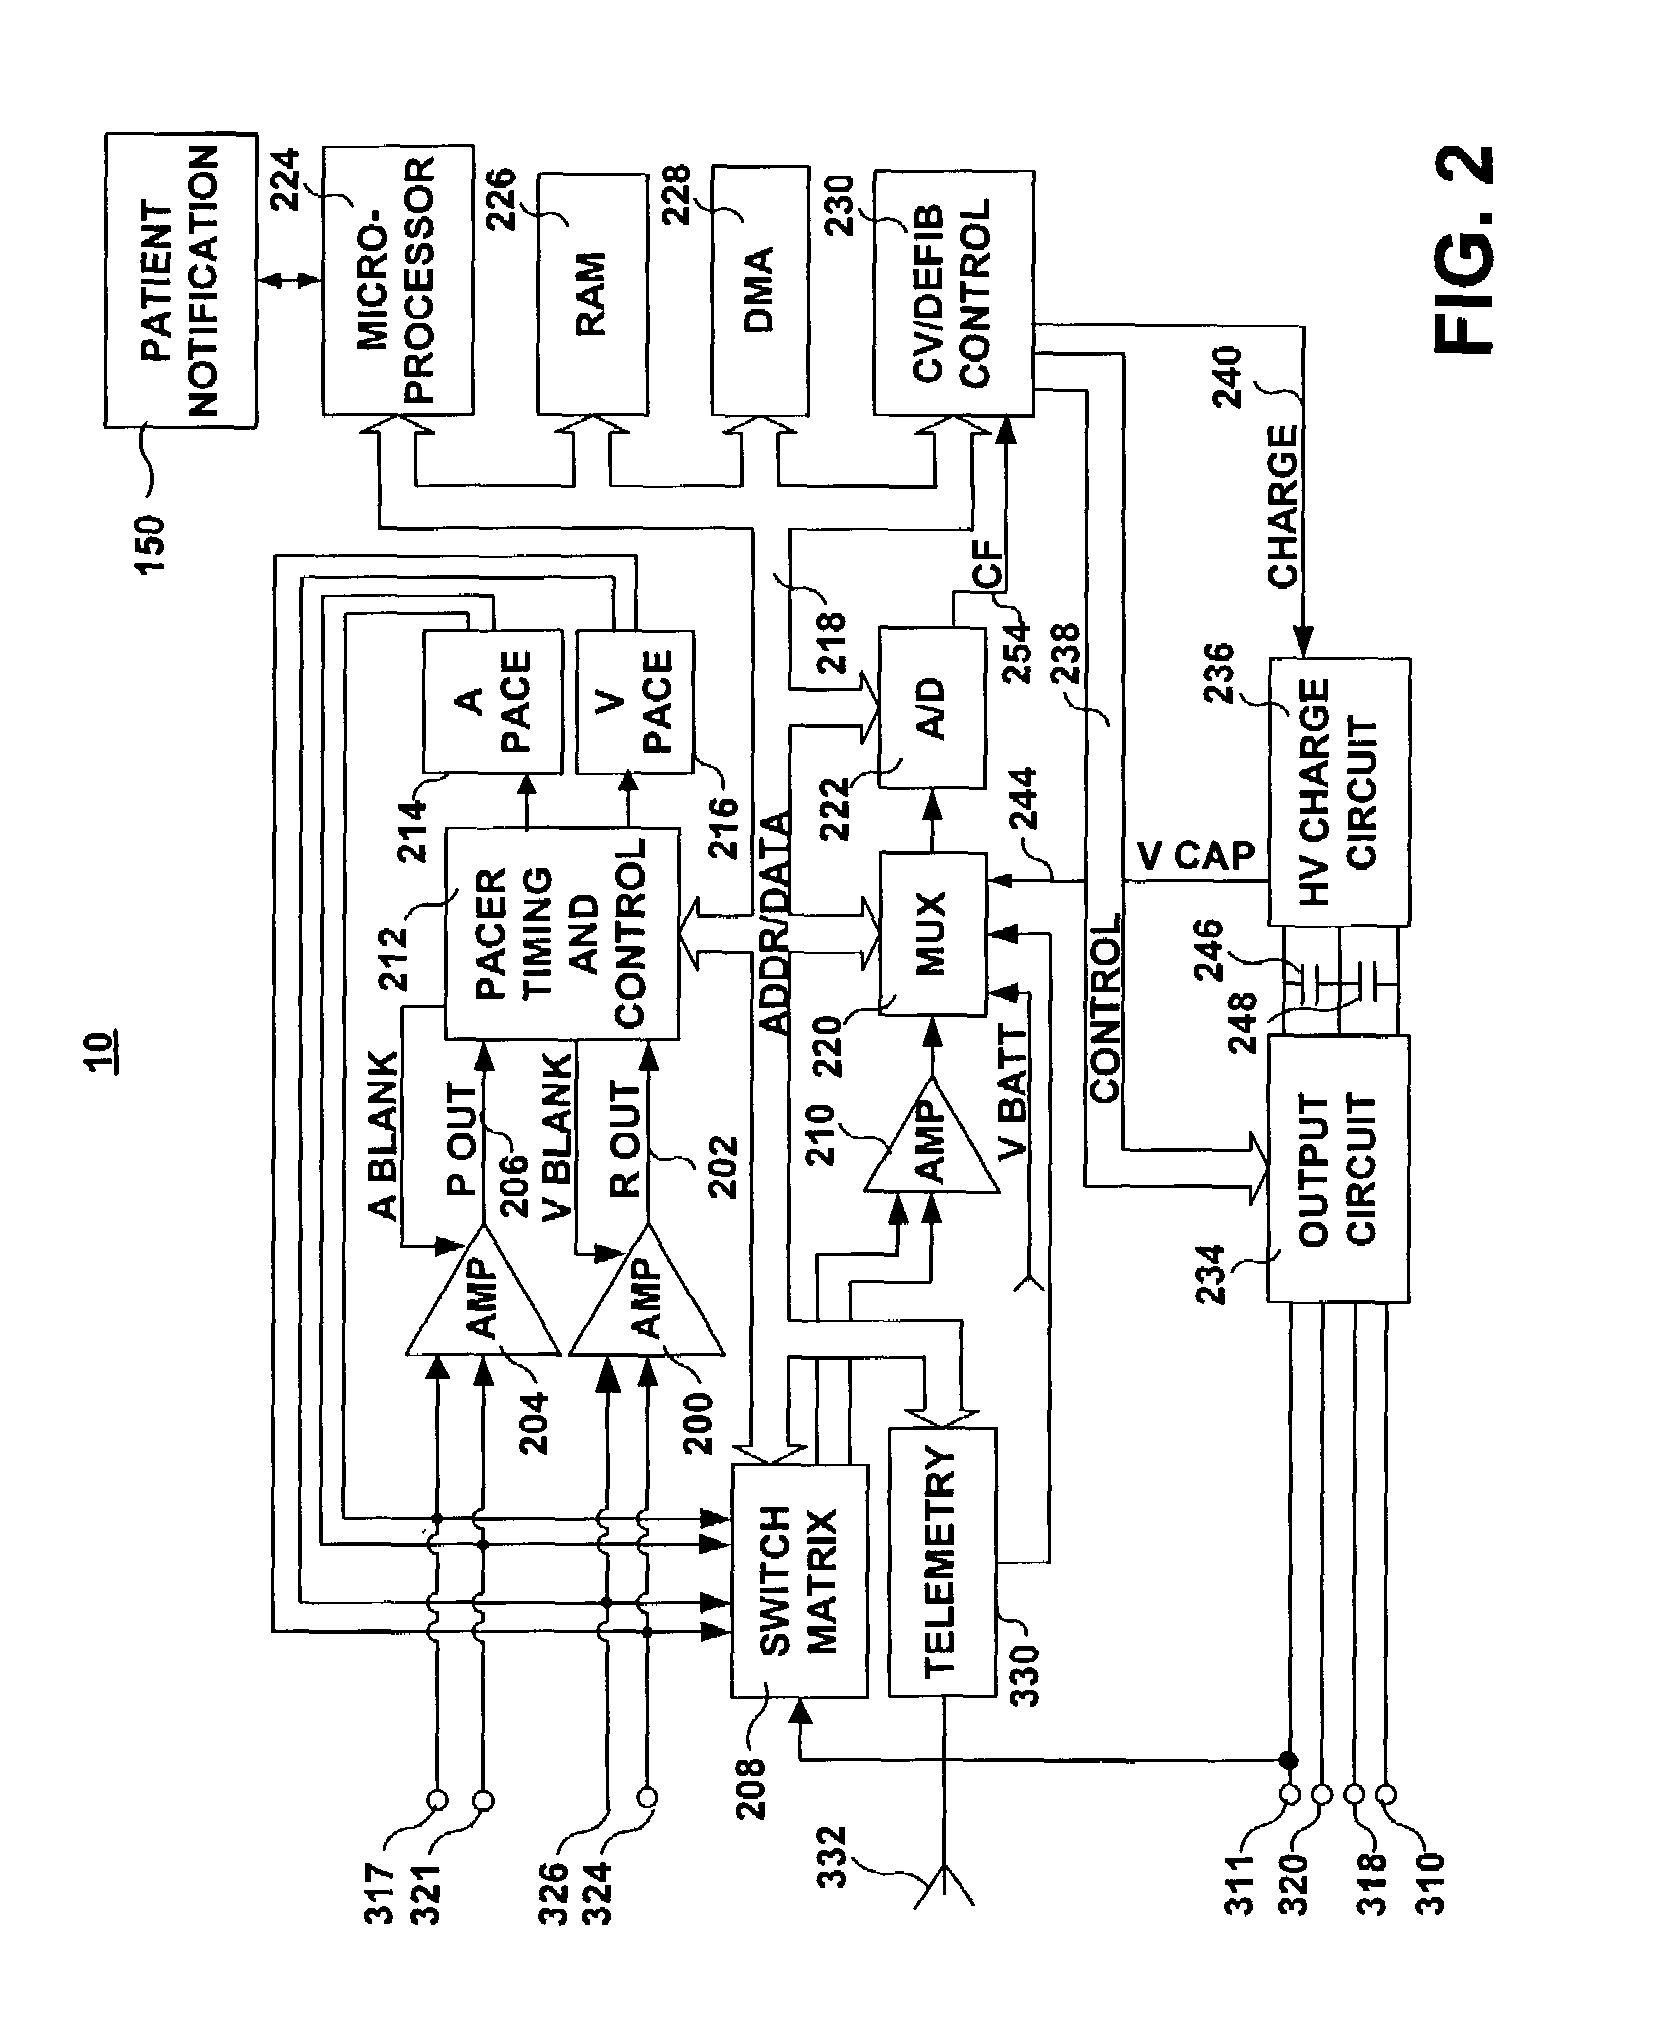 Method for determining a metric of non-sustained arrhythmia occurrence for use in arrhythmia prediction and automatic adjustment of arrhythmia detection parameters